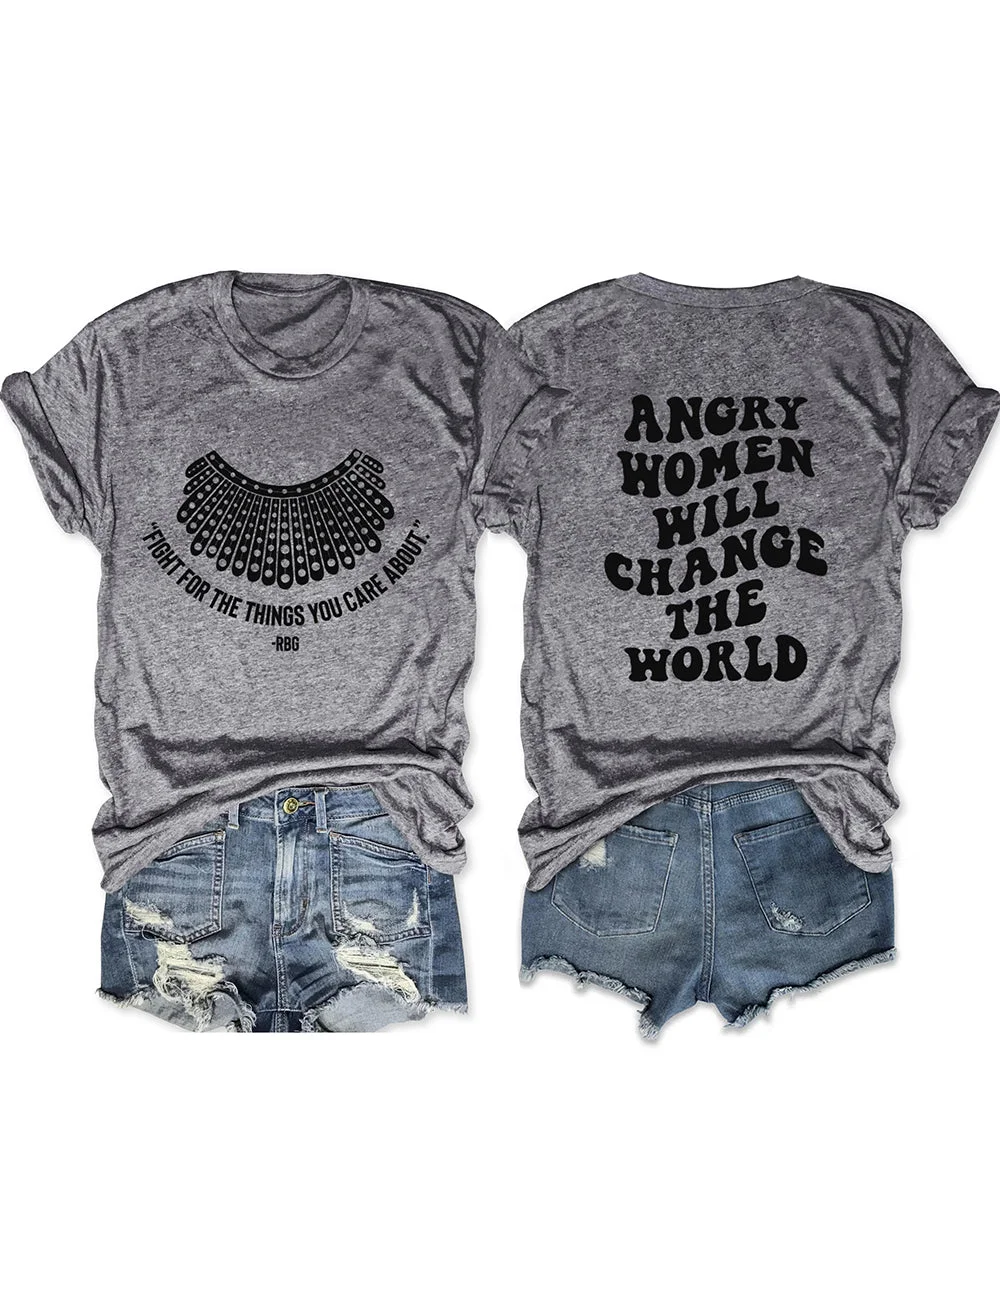 Angry Women Will Change The World Graphic Tee